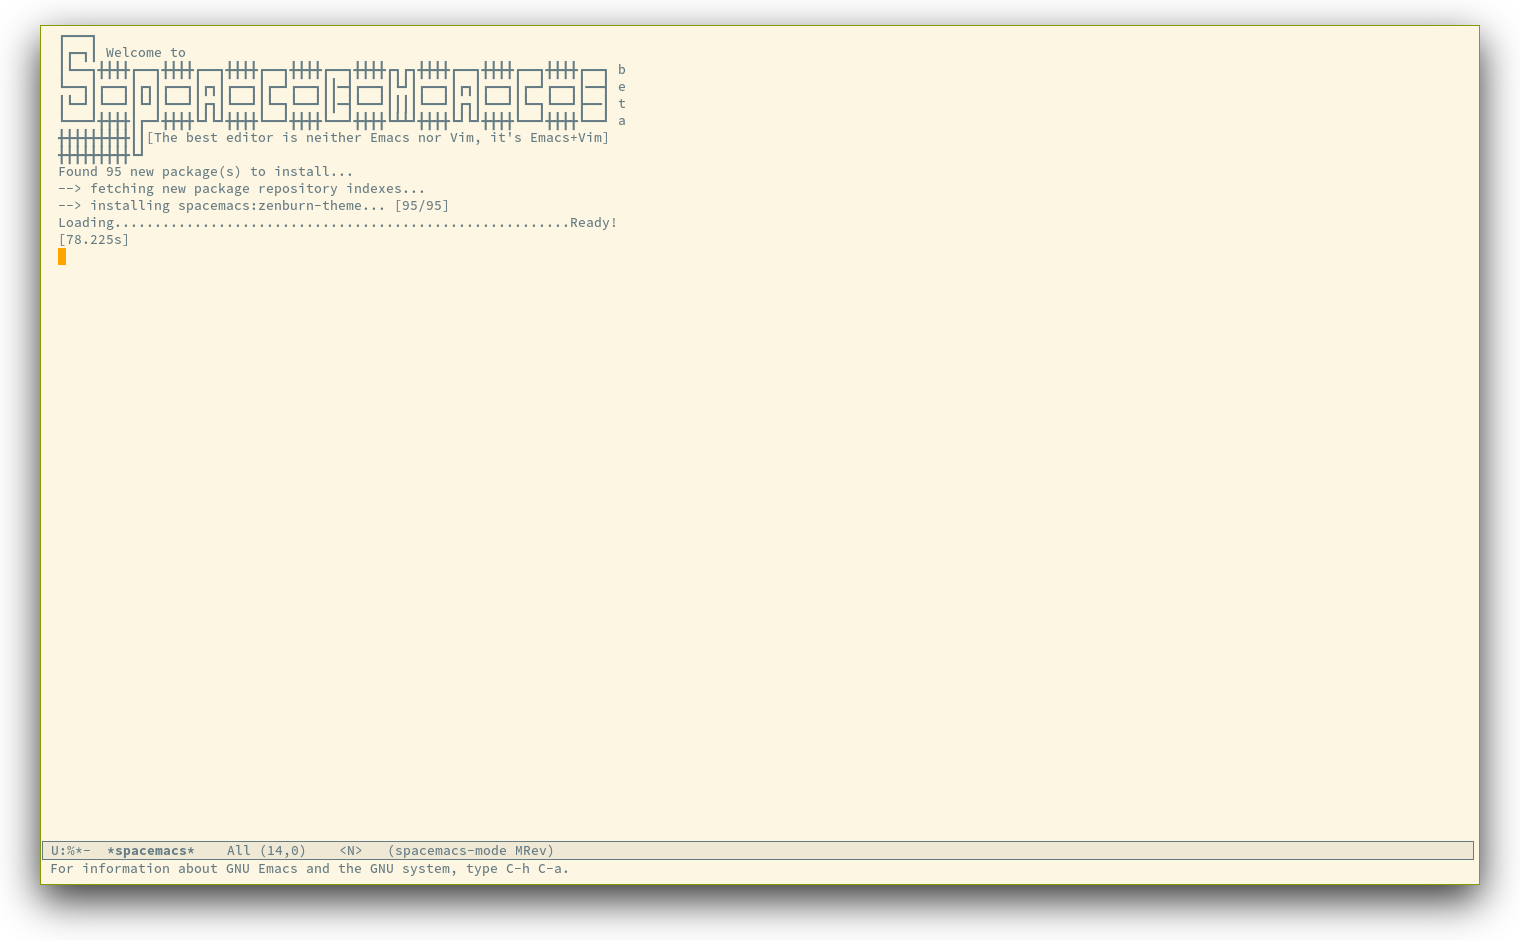 /TakeV/spacemacs/media/commit/1fdd332e5c131dcbb87c94bd5af9a823622221f2/doc/img/spacemacs-startup.png